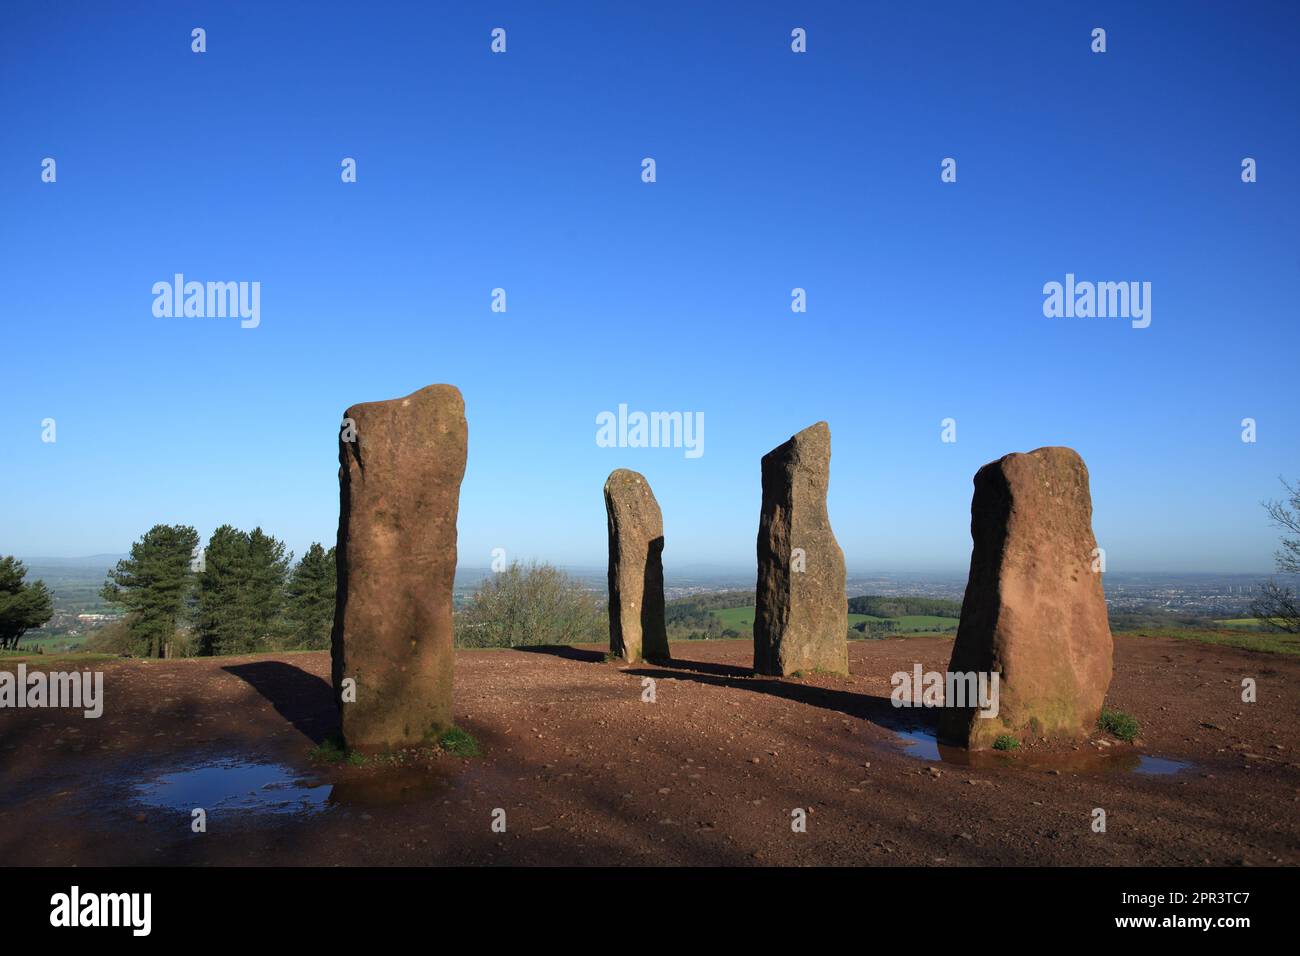 The Four stones on the summit of the Clent hills, Worcestershire, England, UK. Stock Photo